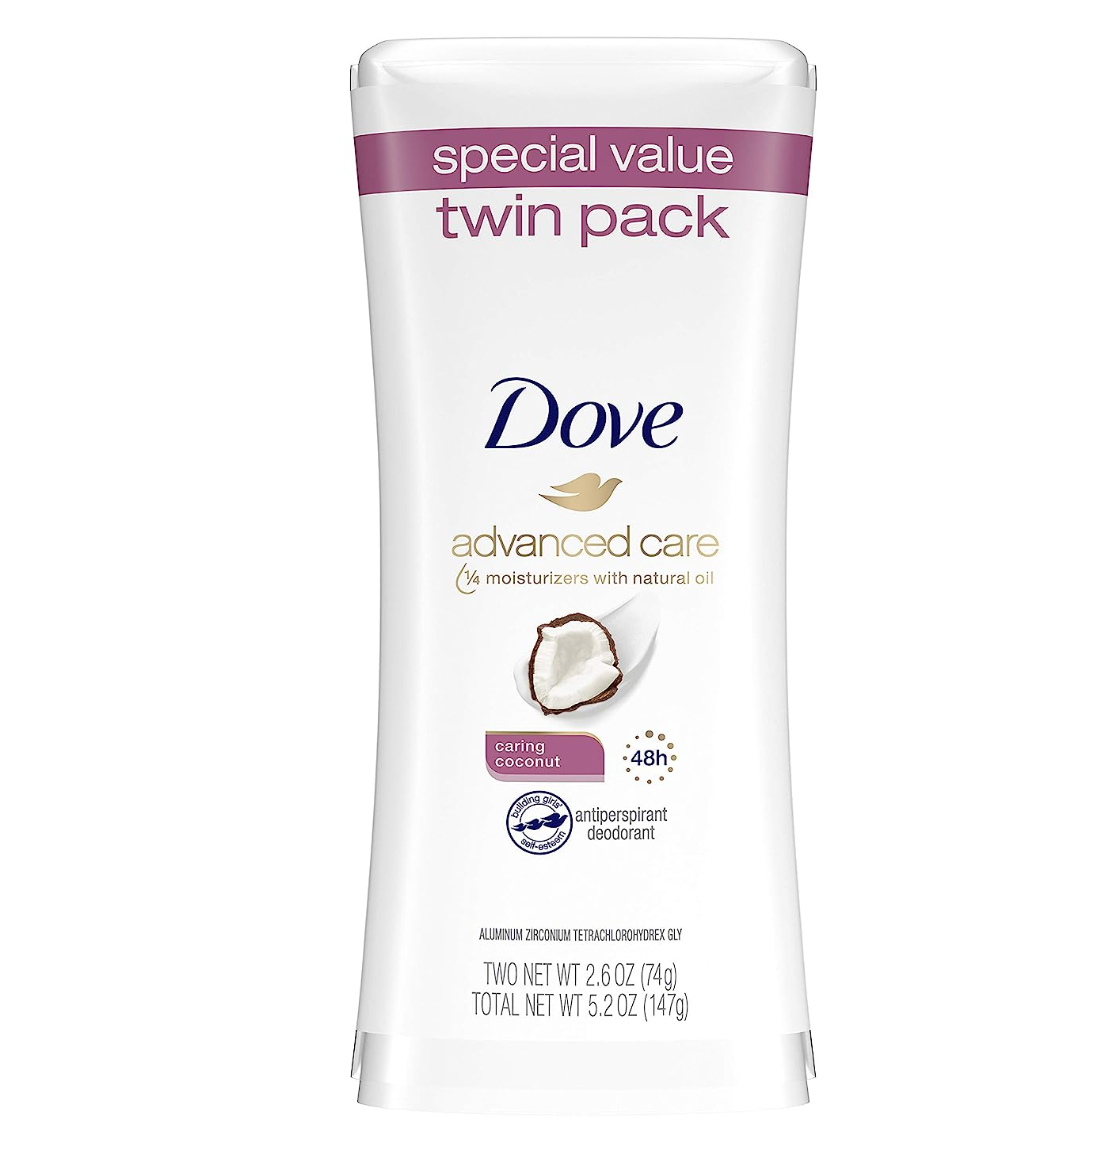 Dove Antiperspirant Deodorant Stick No White Marks on 100 Colors Clear Finish 48-Hour Sweat and Odor Protecting Deodorant for Women, 2.6 Ounce (Pack of 4)